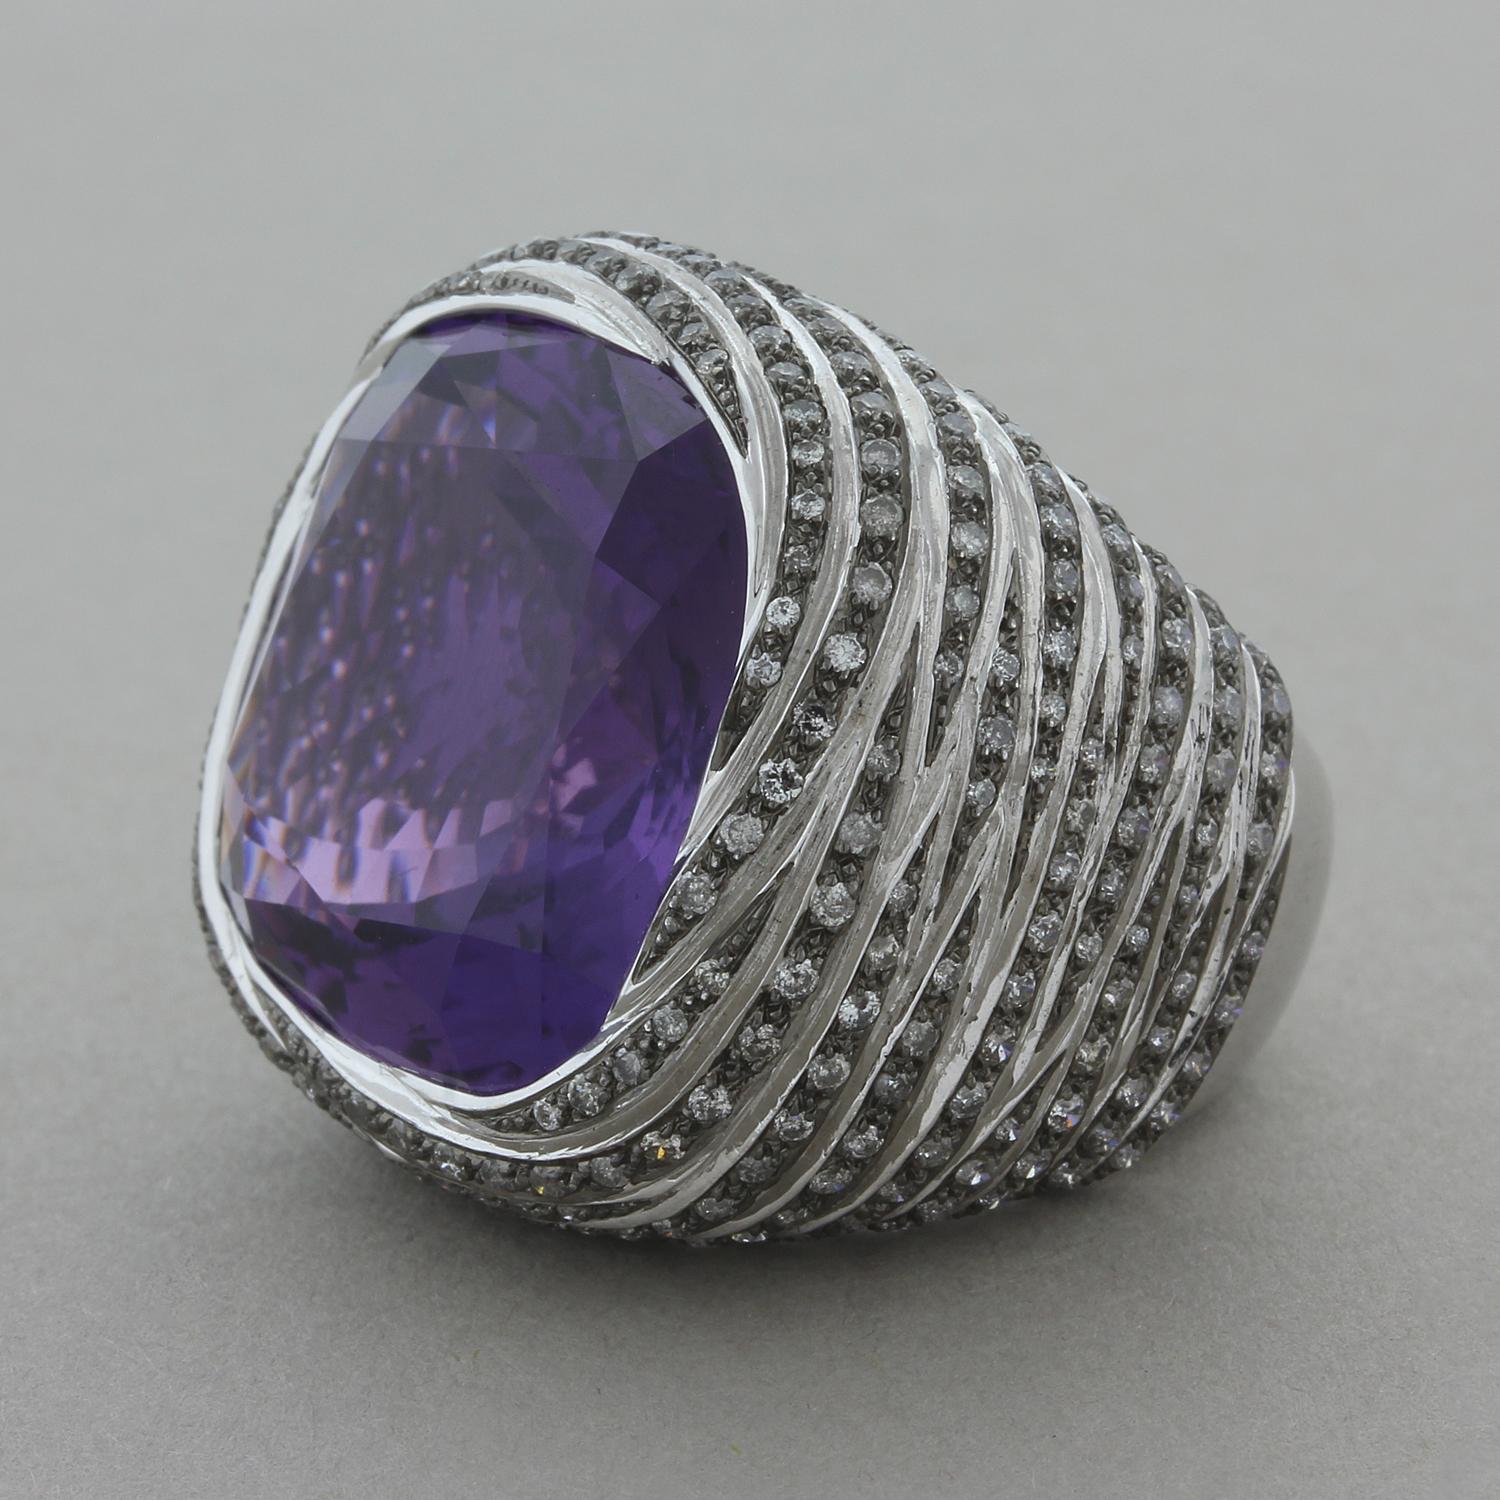 This ring features a majestic 25.32 carat cushion cut amethyst with a deep royal purple color. It is surrounded by 2.17 carats of round cut diamonds set in an 18K white gold. A big look for someone looking for a statement piece.  

Ring Size 6.5